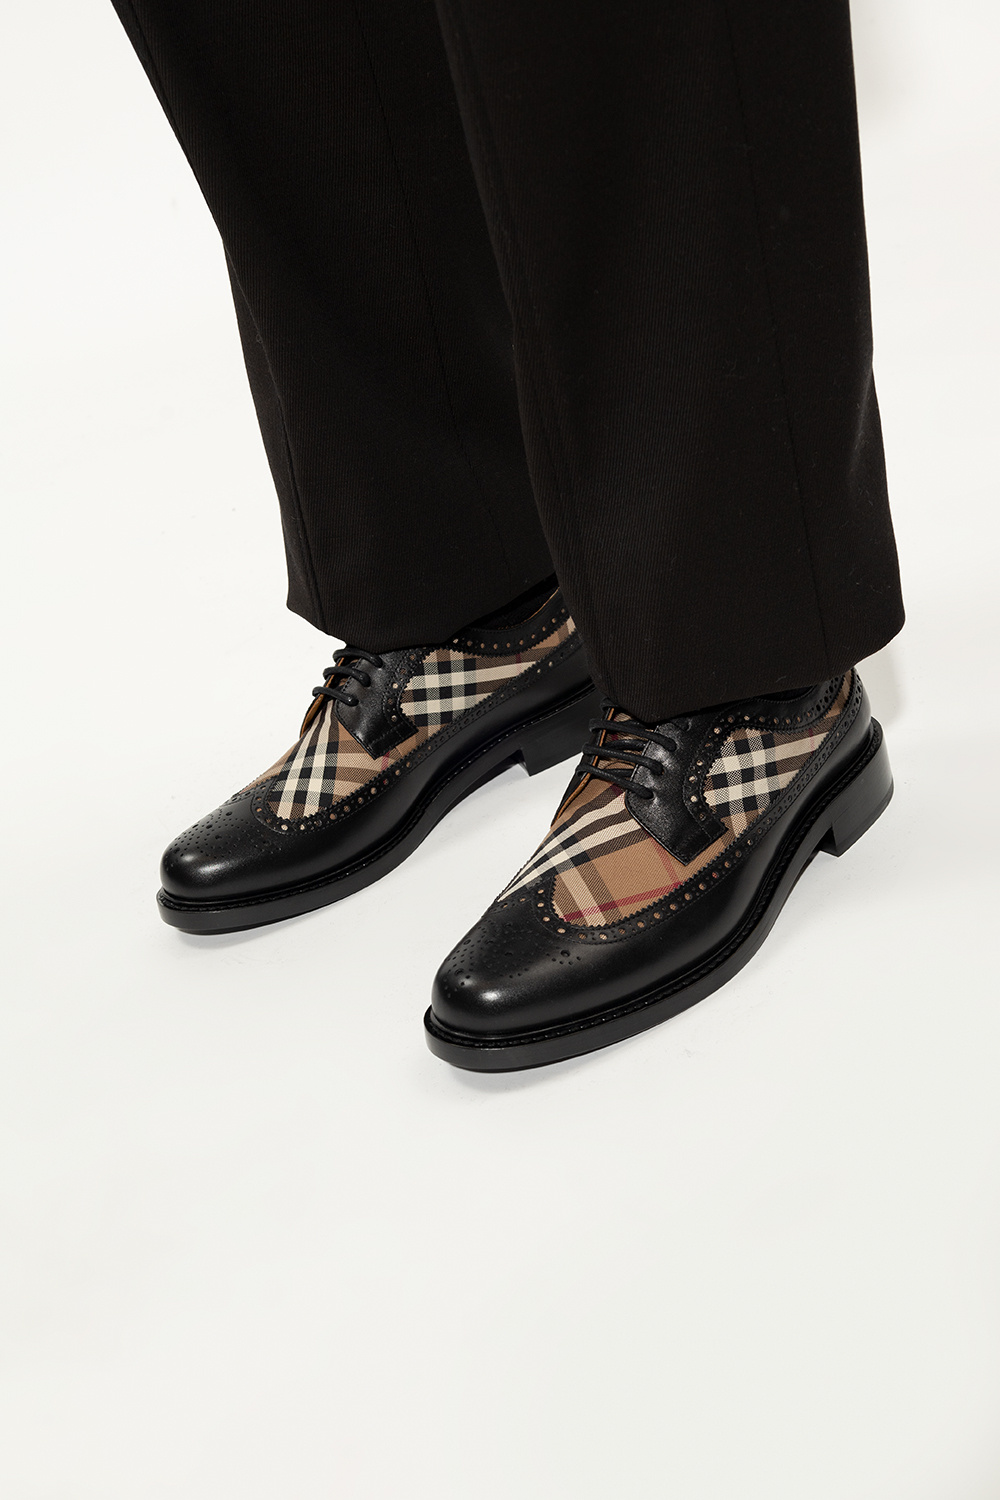 Burberry ‘New Arndale’ Derby shoes